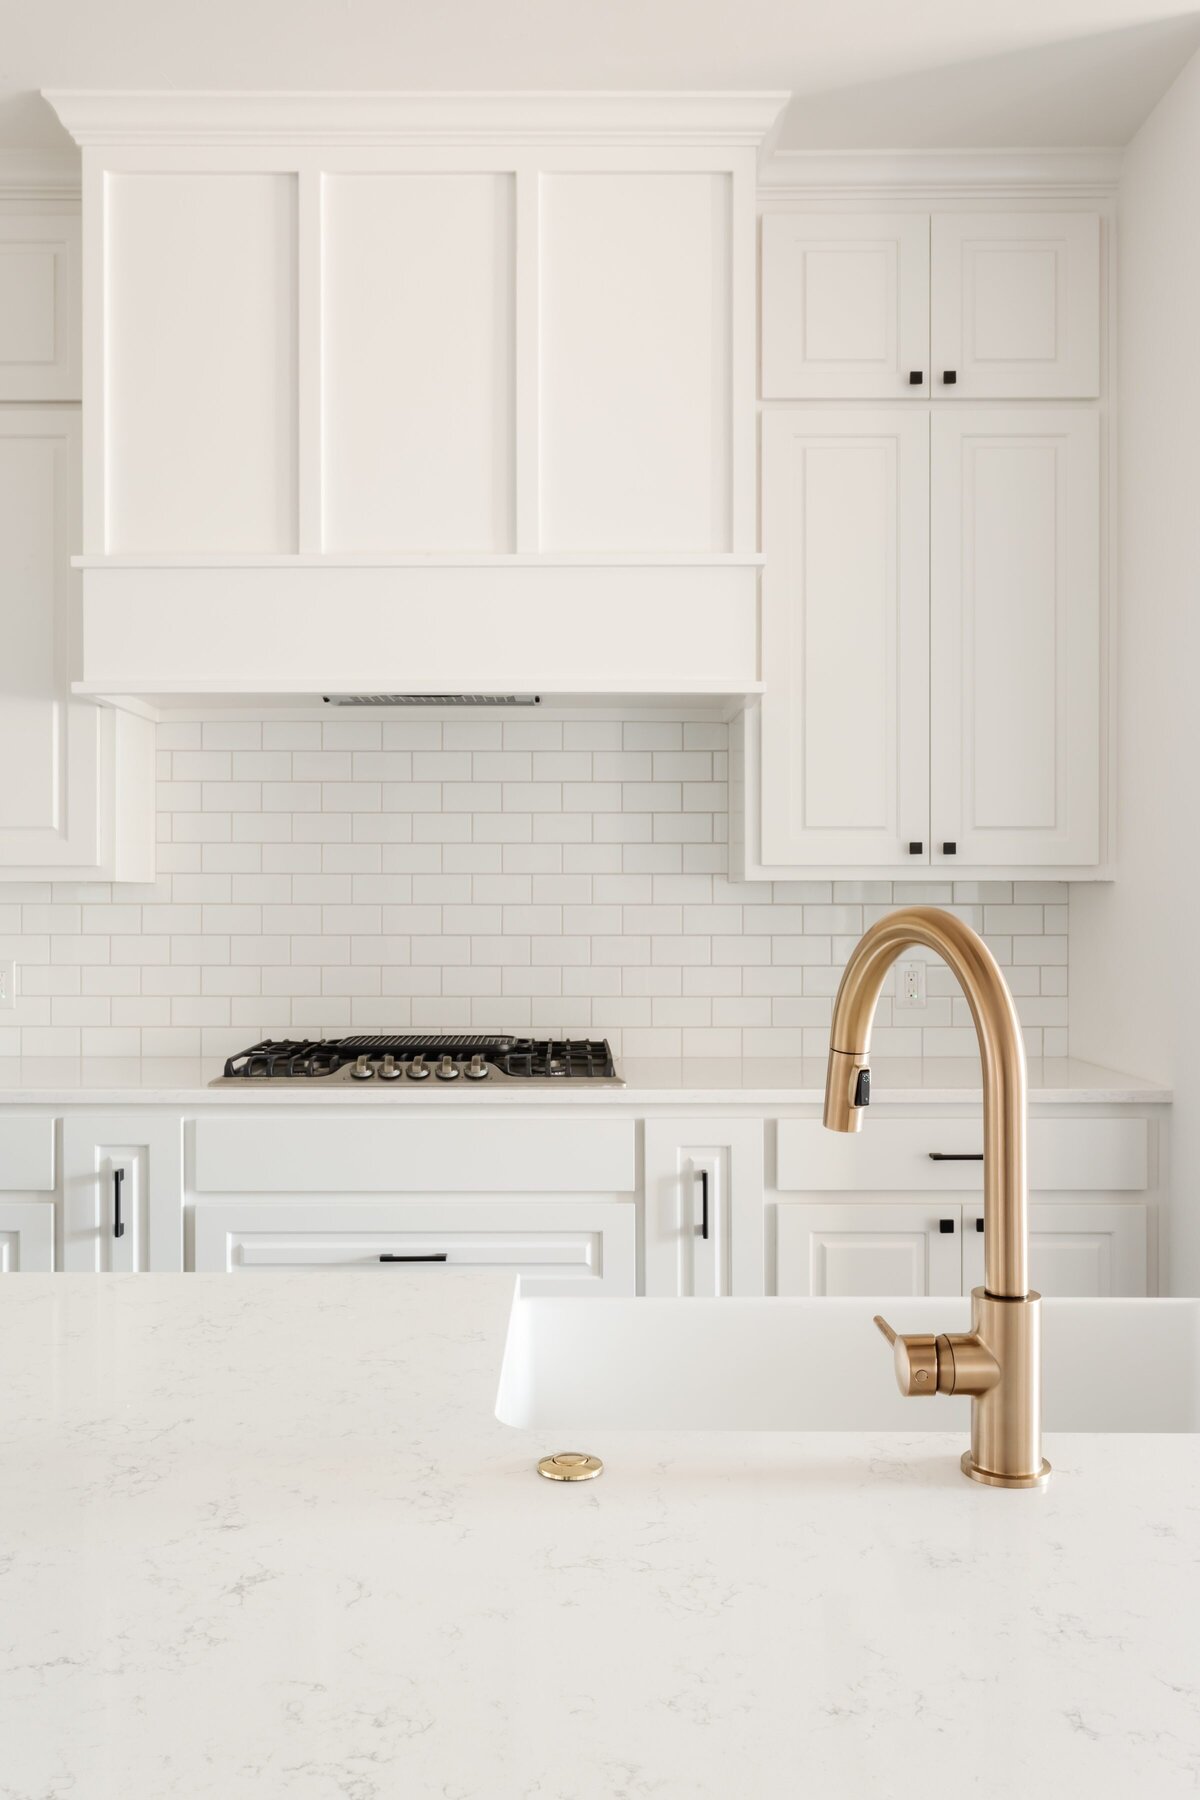 Marcie Meredith Texas based interior design photography. White kitchen gold faucet